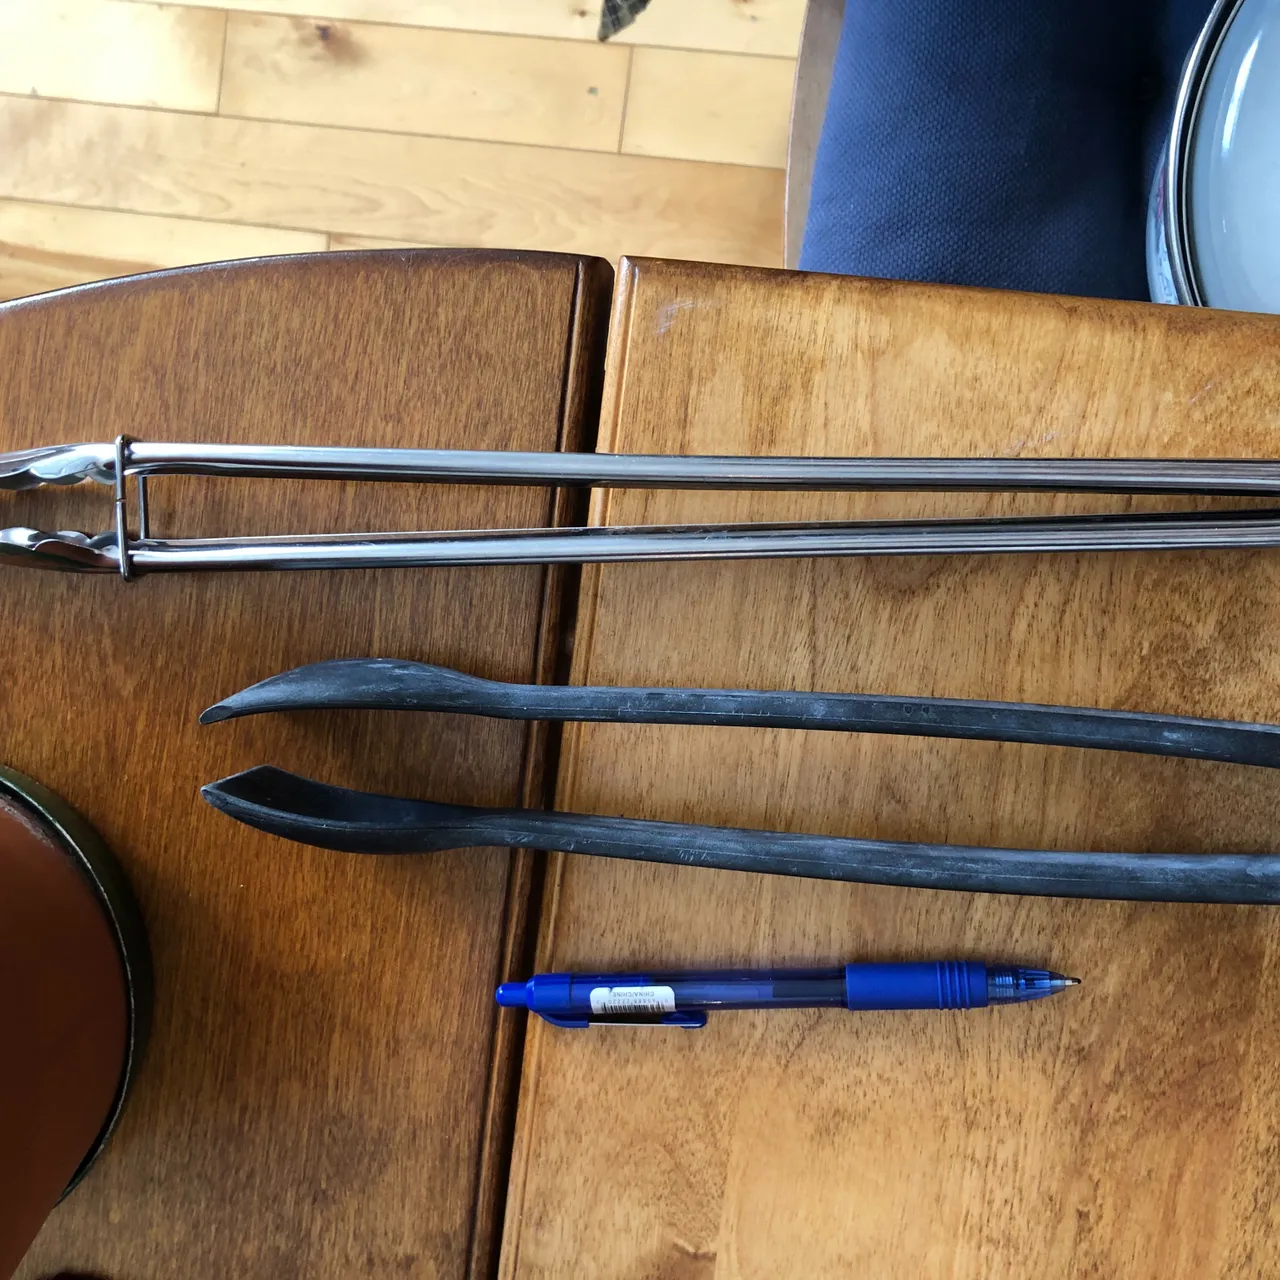 Two sets of tongs  photo 1